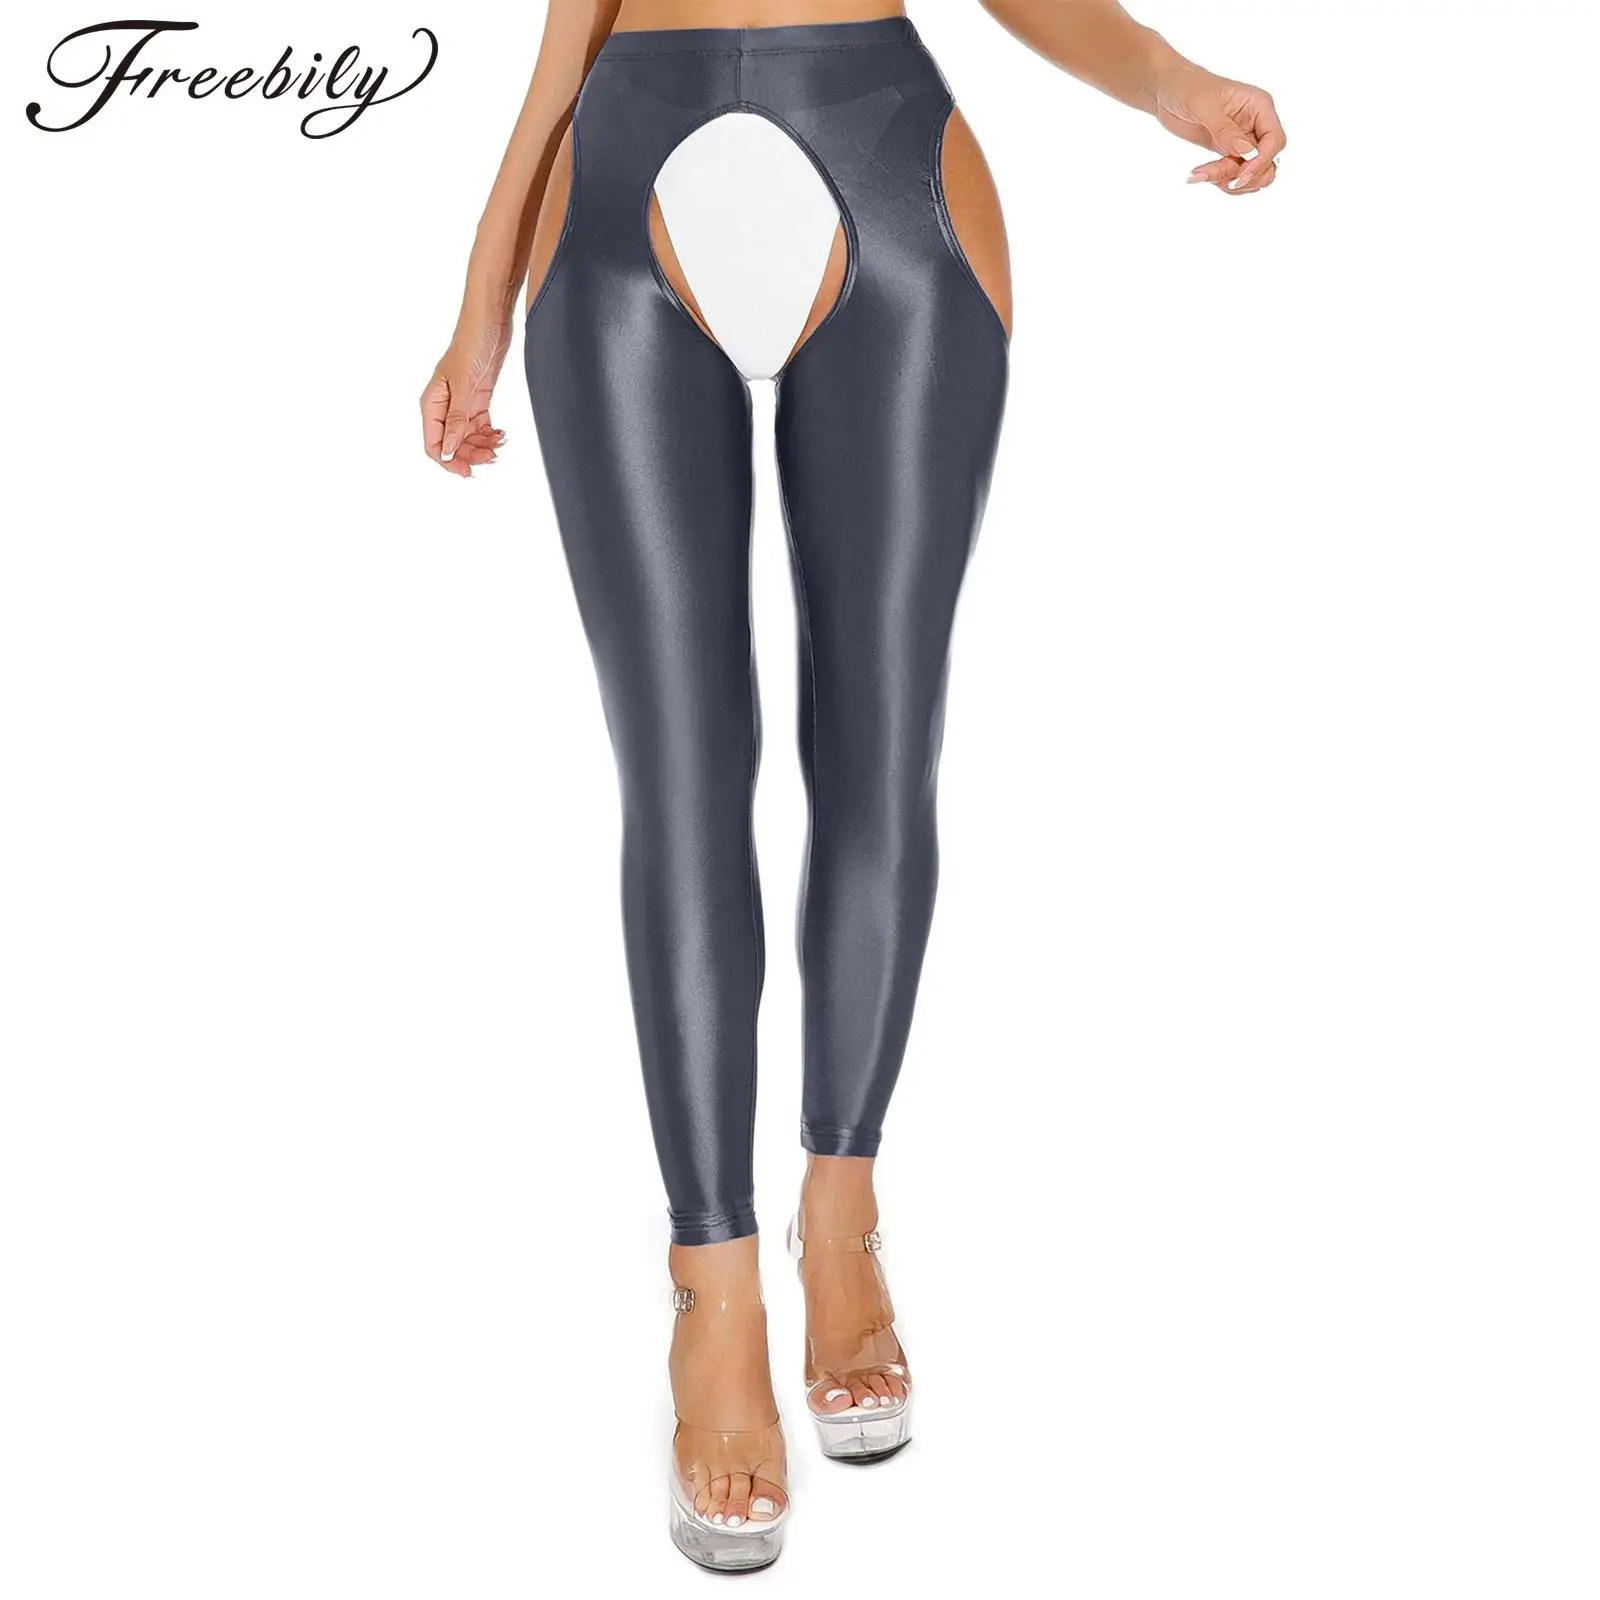 

Women Sexy Glossy Hollow Out Crotchless Pants High Waist Stretchy Thigh Leggings Yoga Gymnastics Dance Skinny Trouser Nightwear